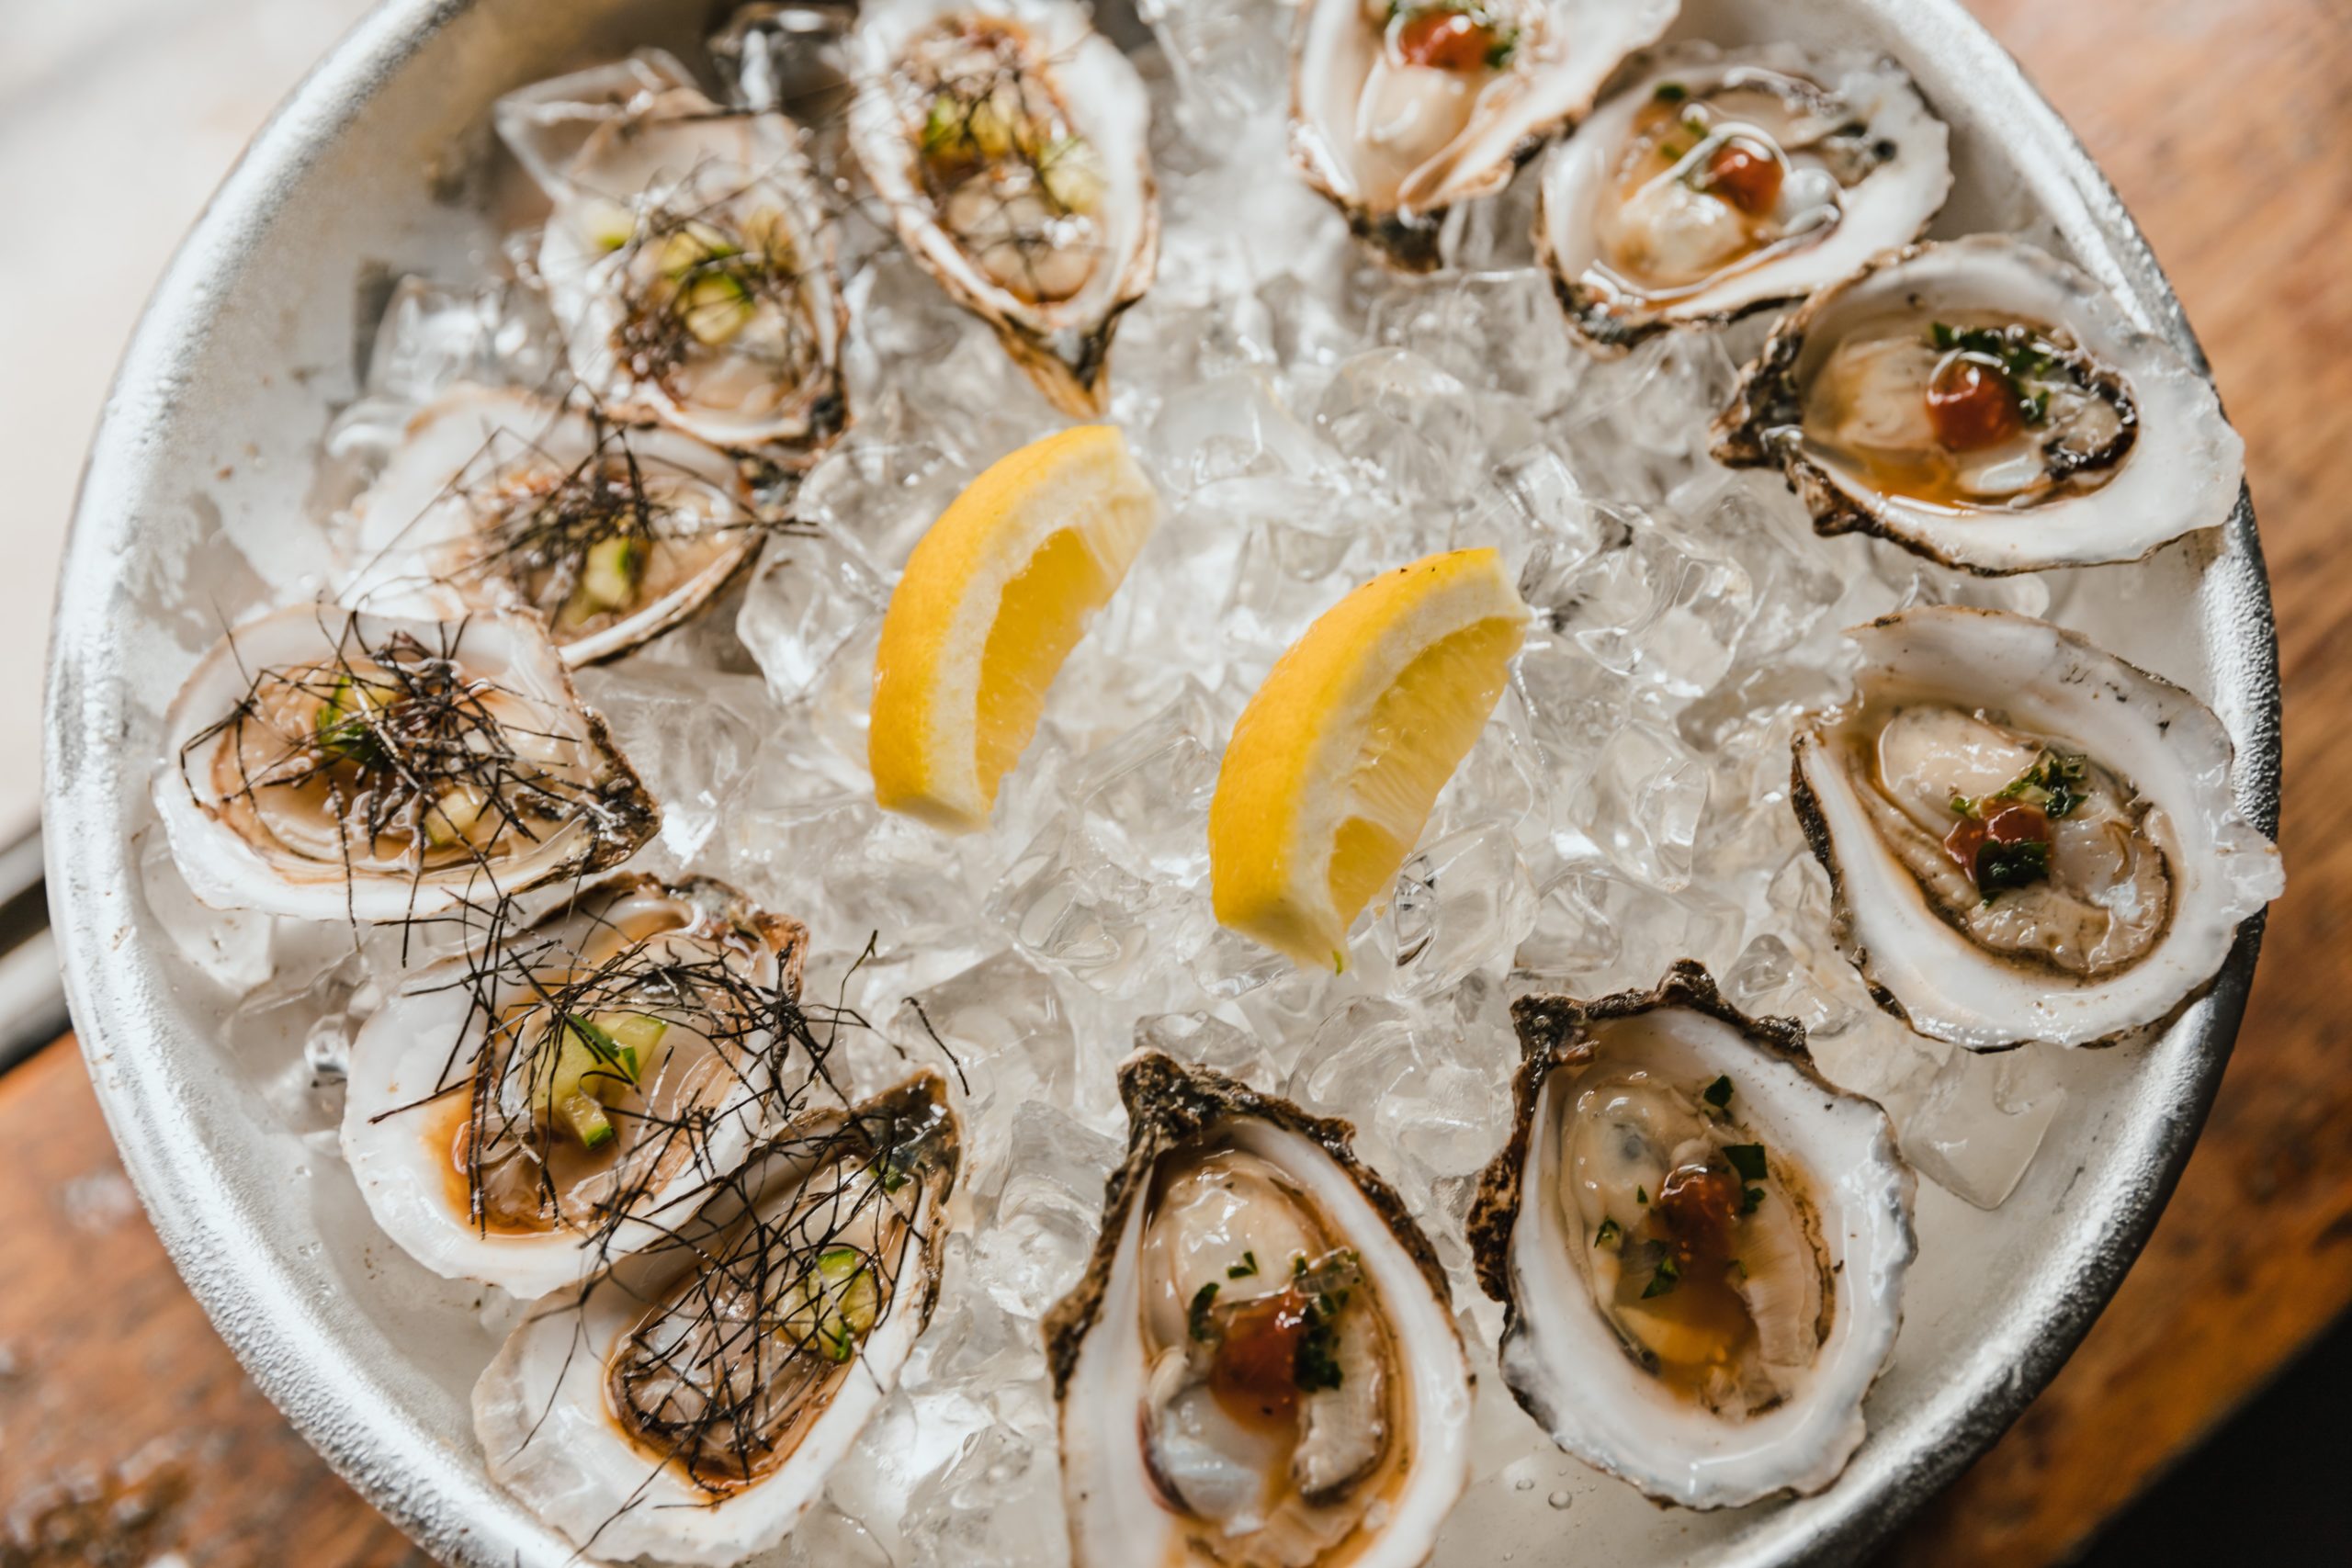 Oysters are a source of zinc which supports our immune system